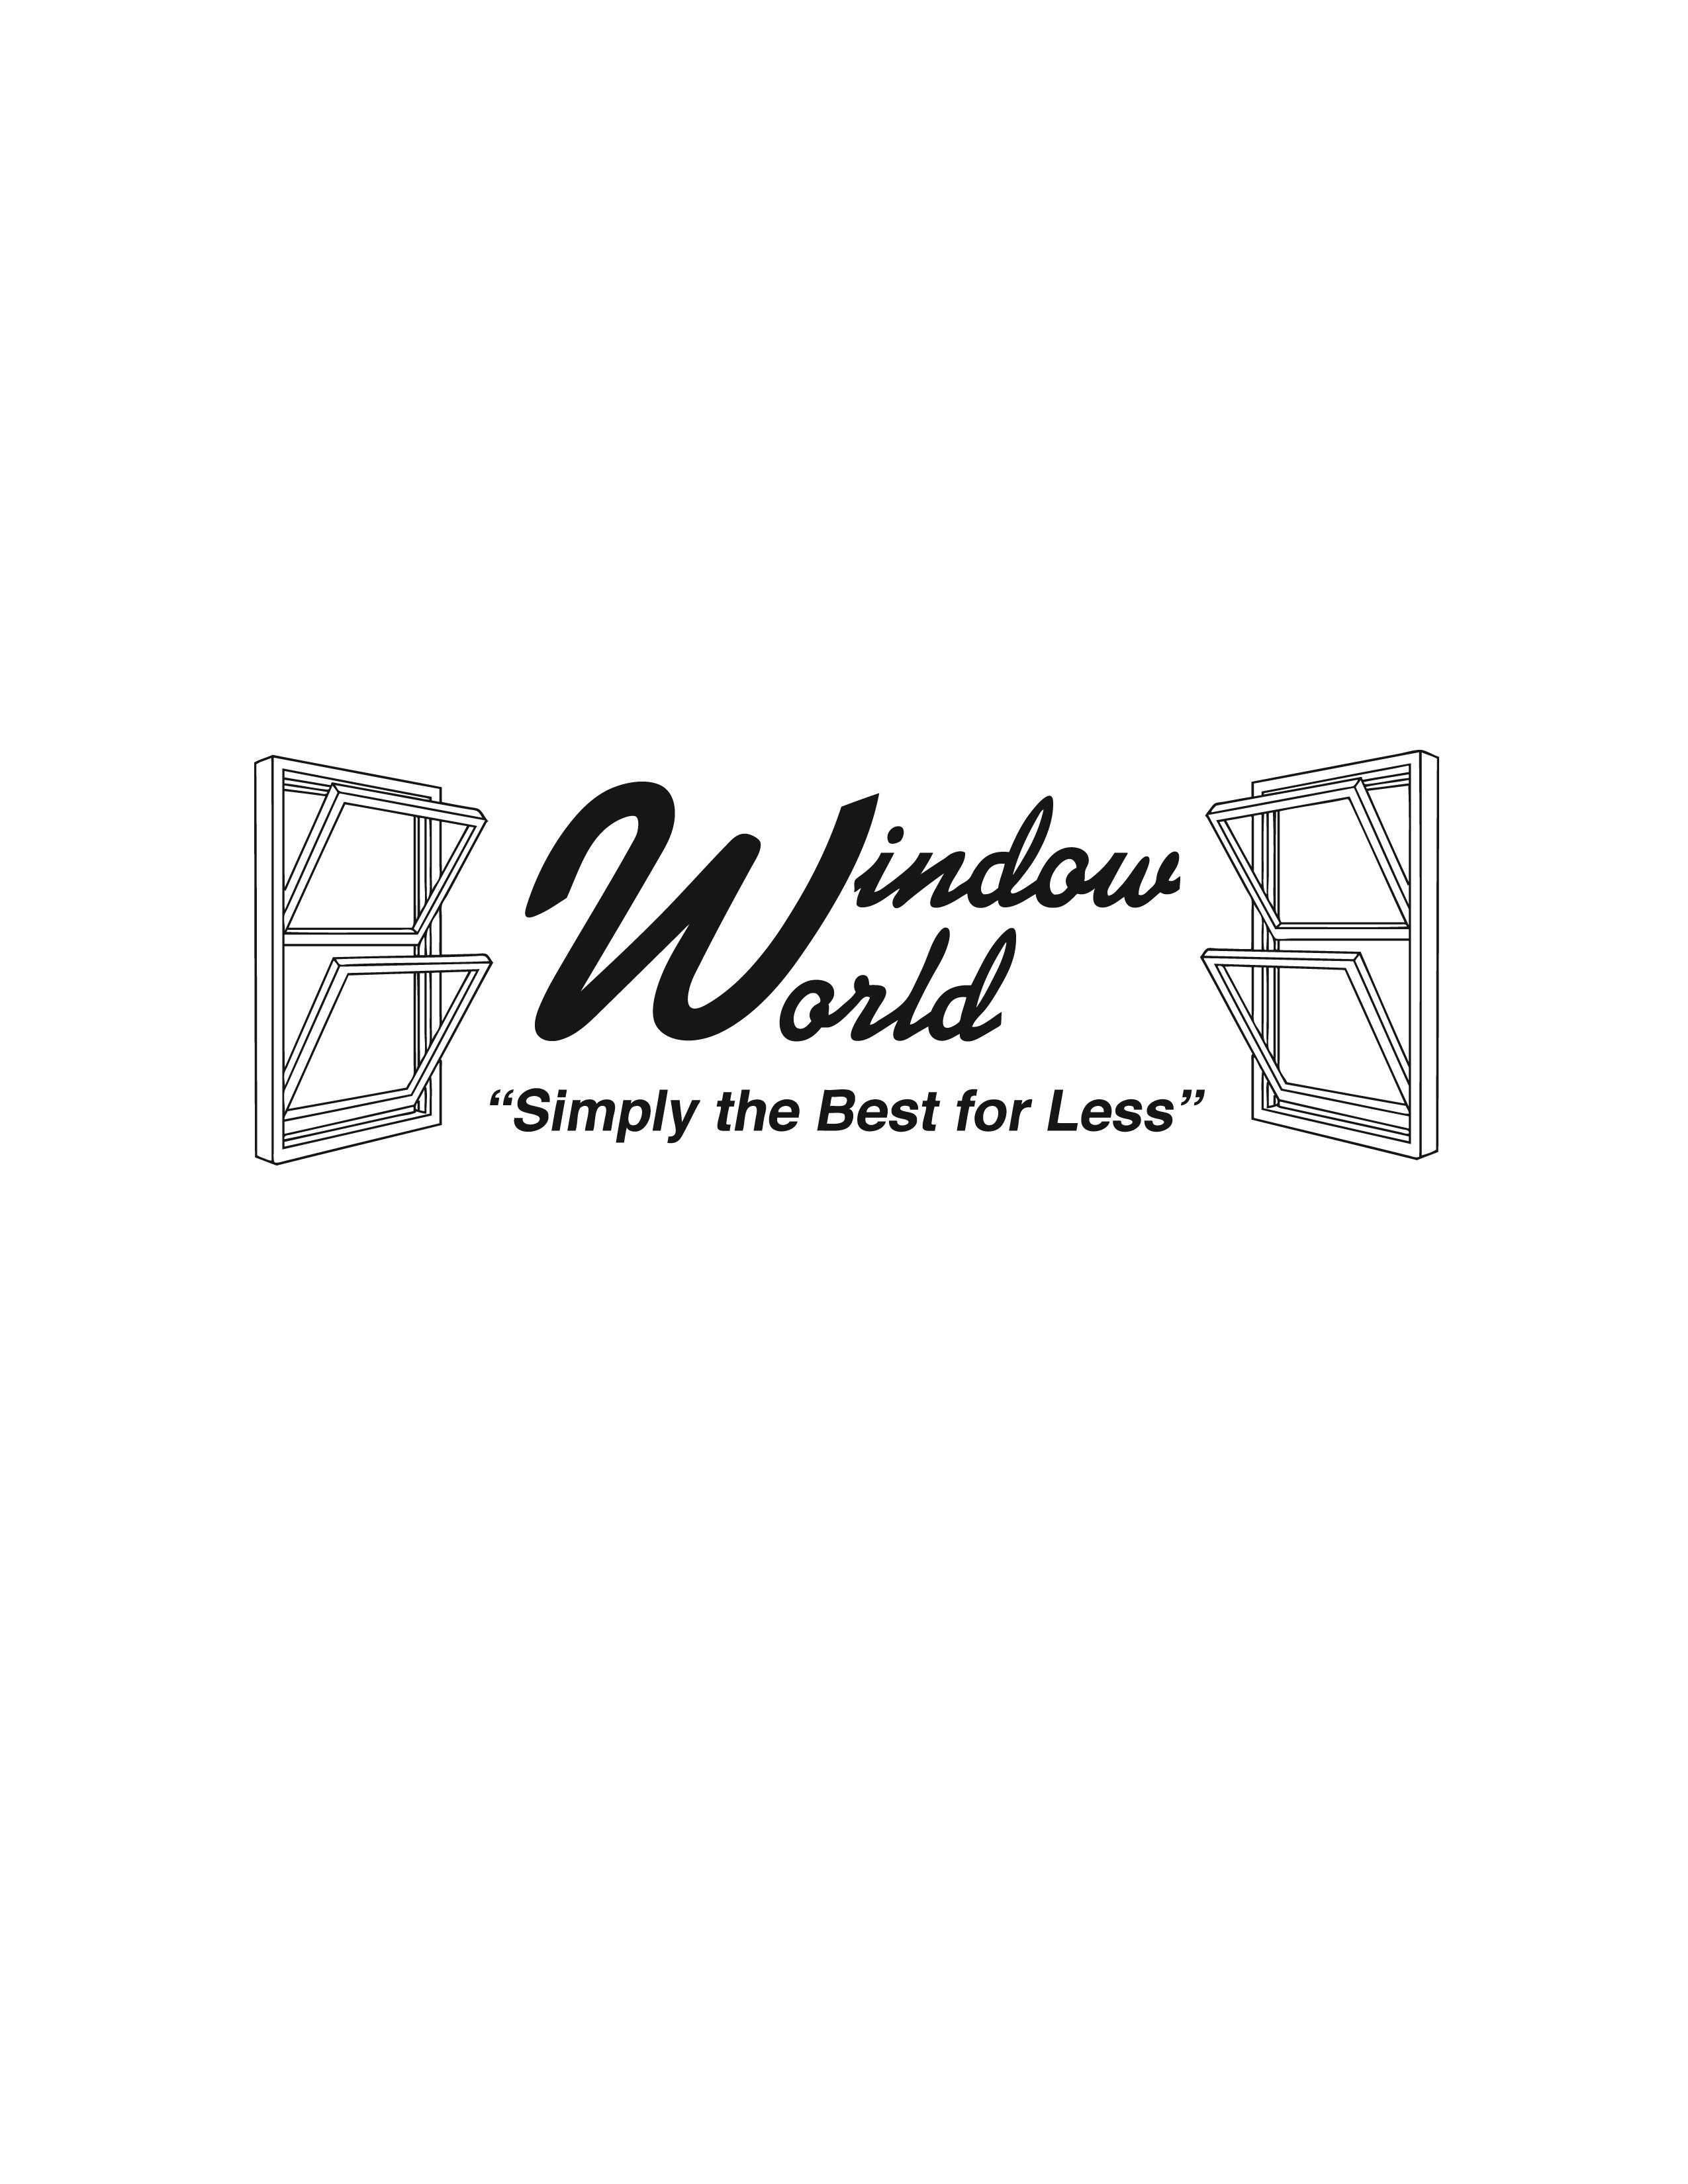  WINDOW WORLD SIMPLY THE BEST FOR LESS